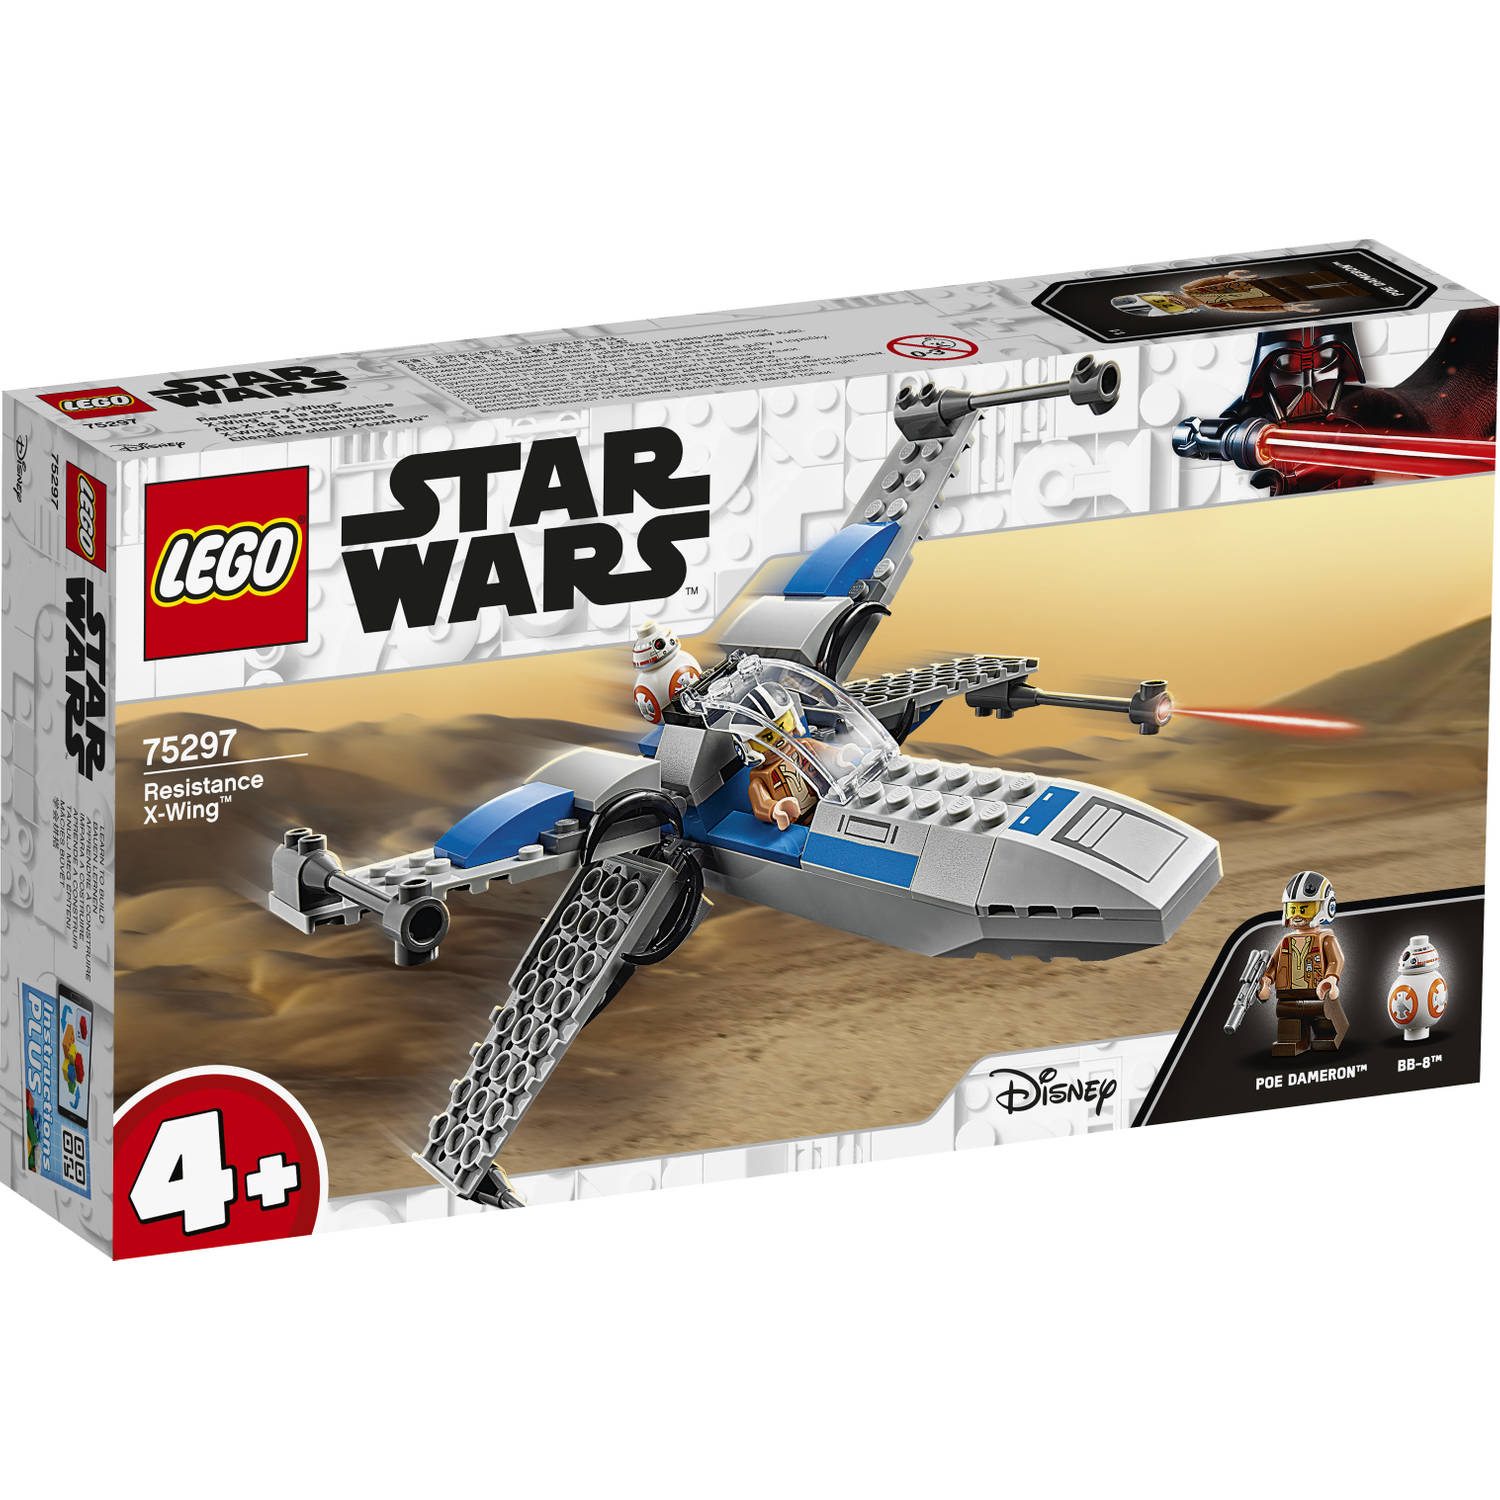 Lego Star Wars Resistance X-wing 75297